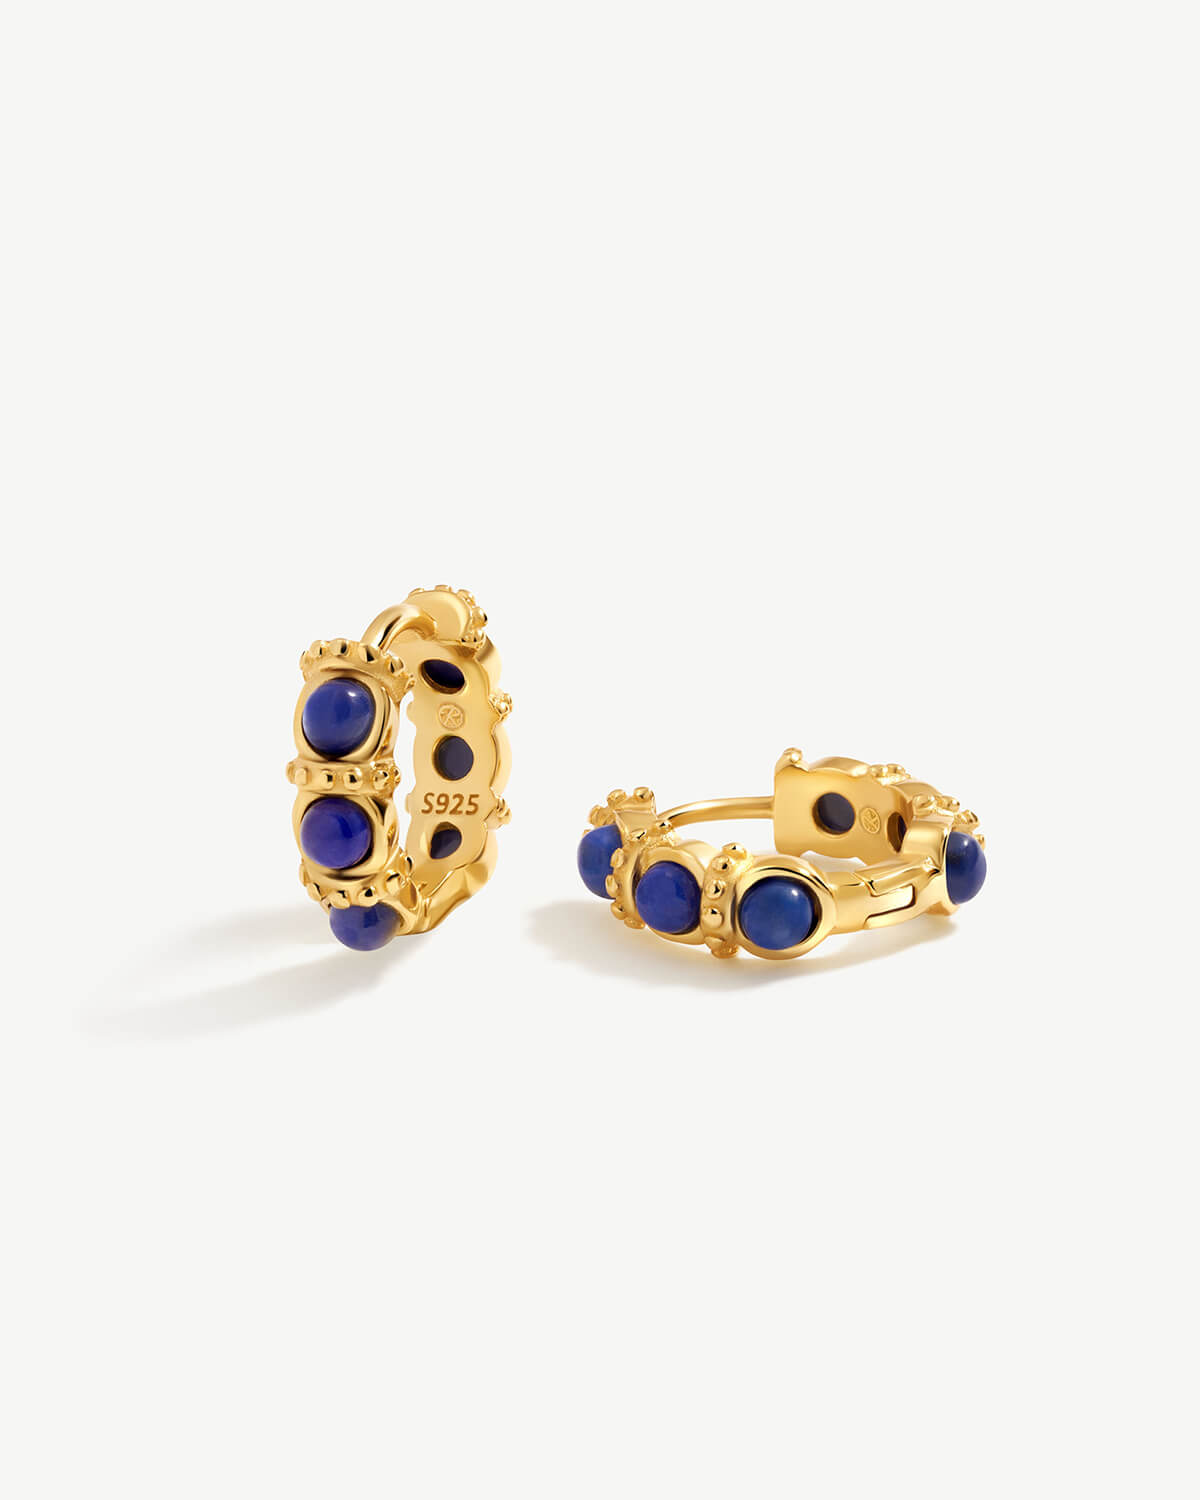 a pair of gold earrings with blue stones